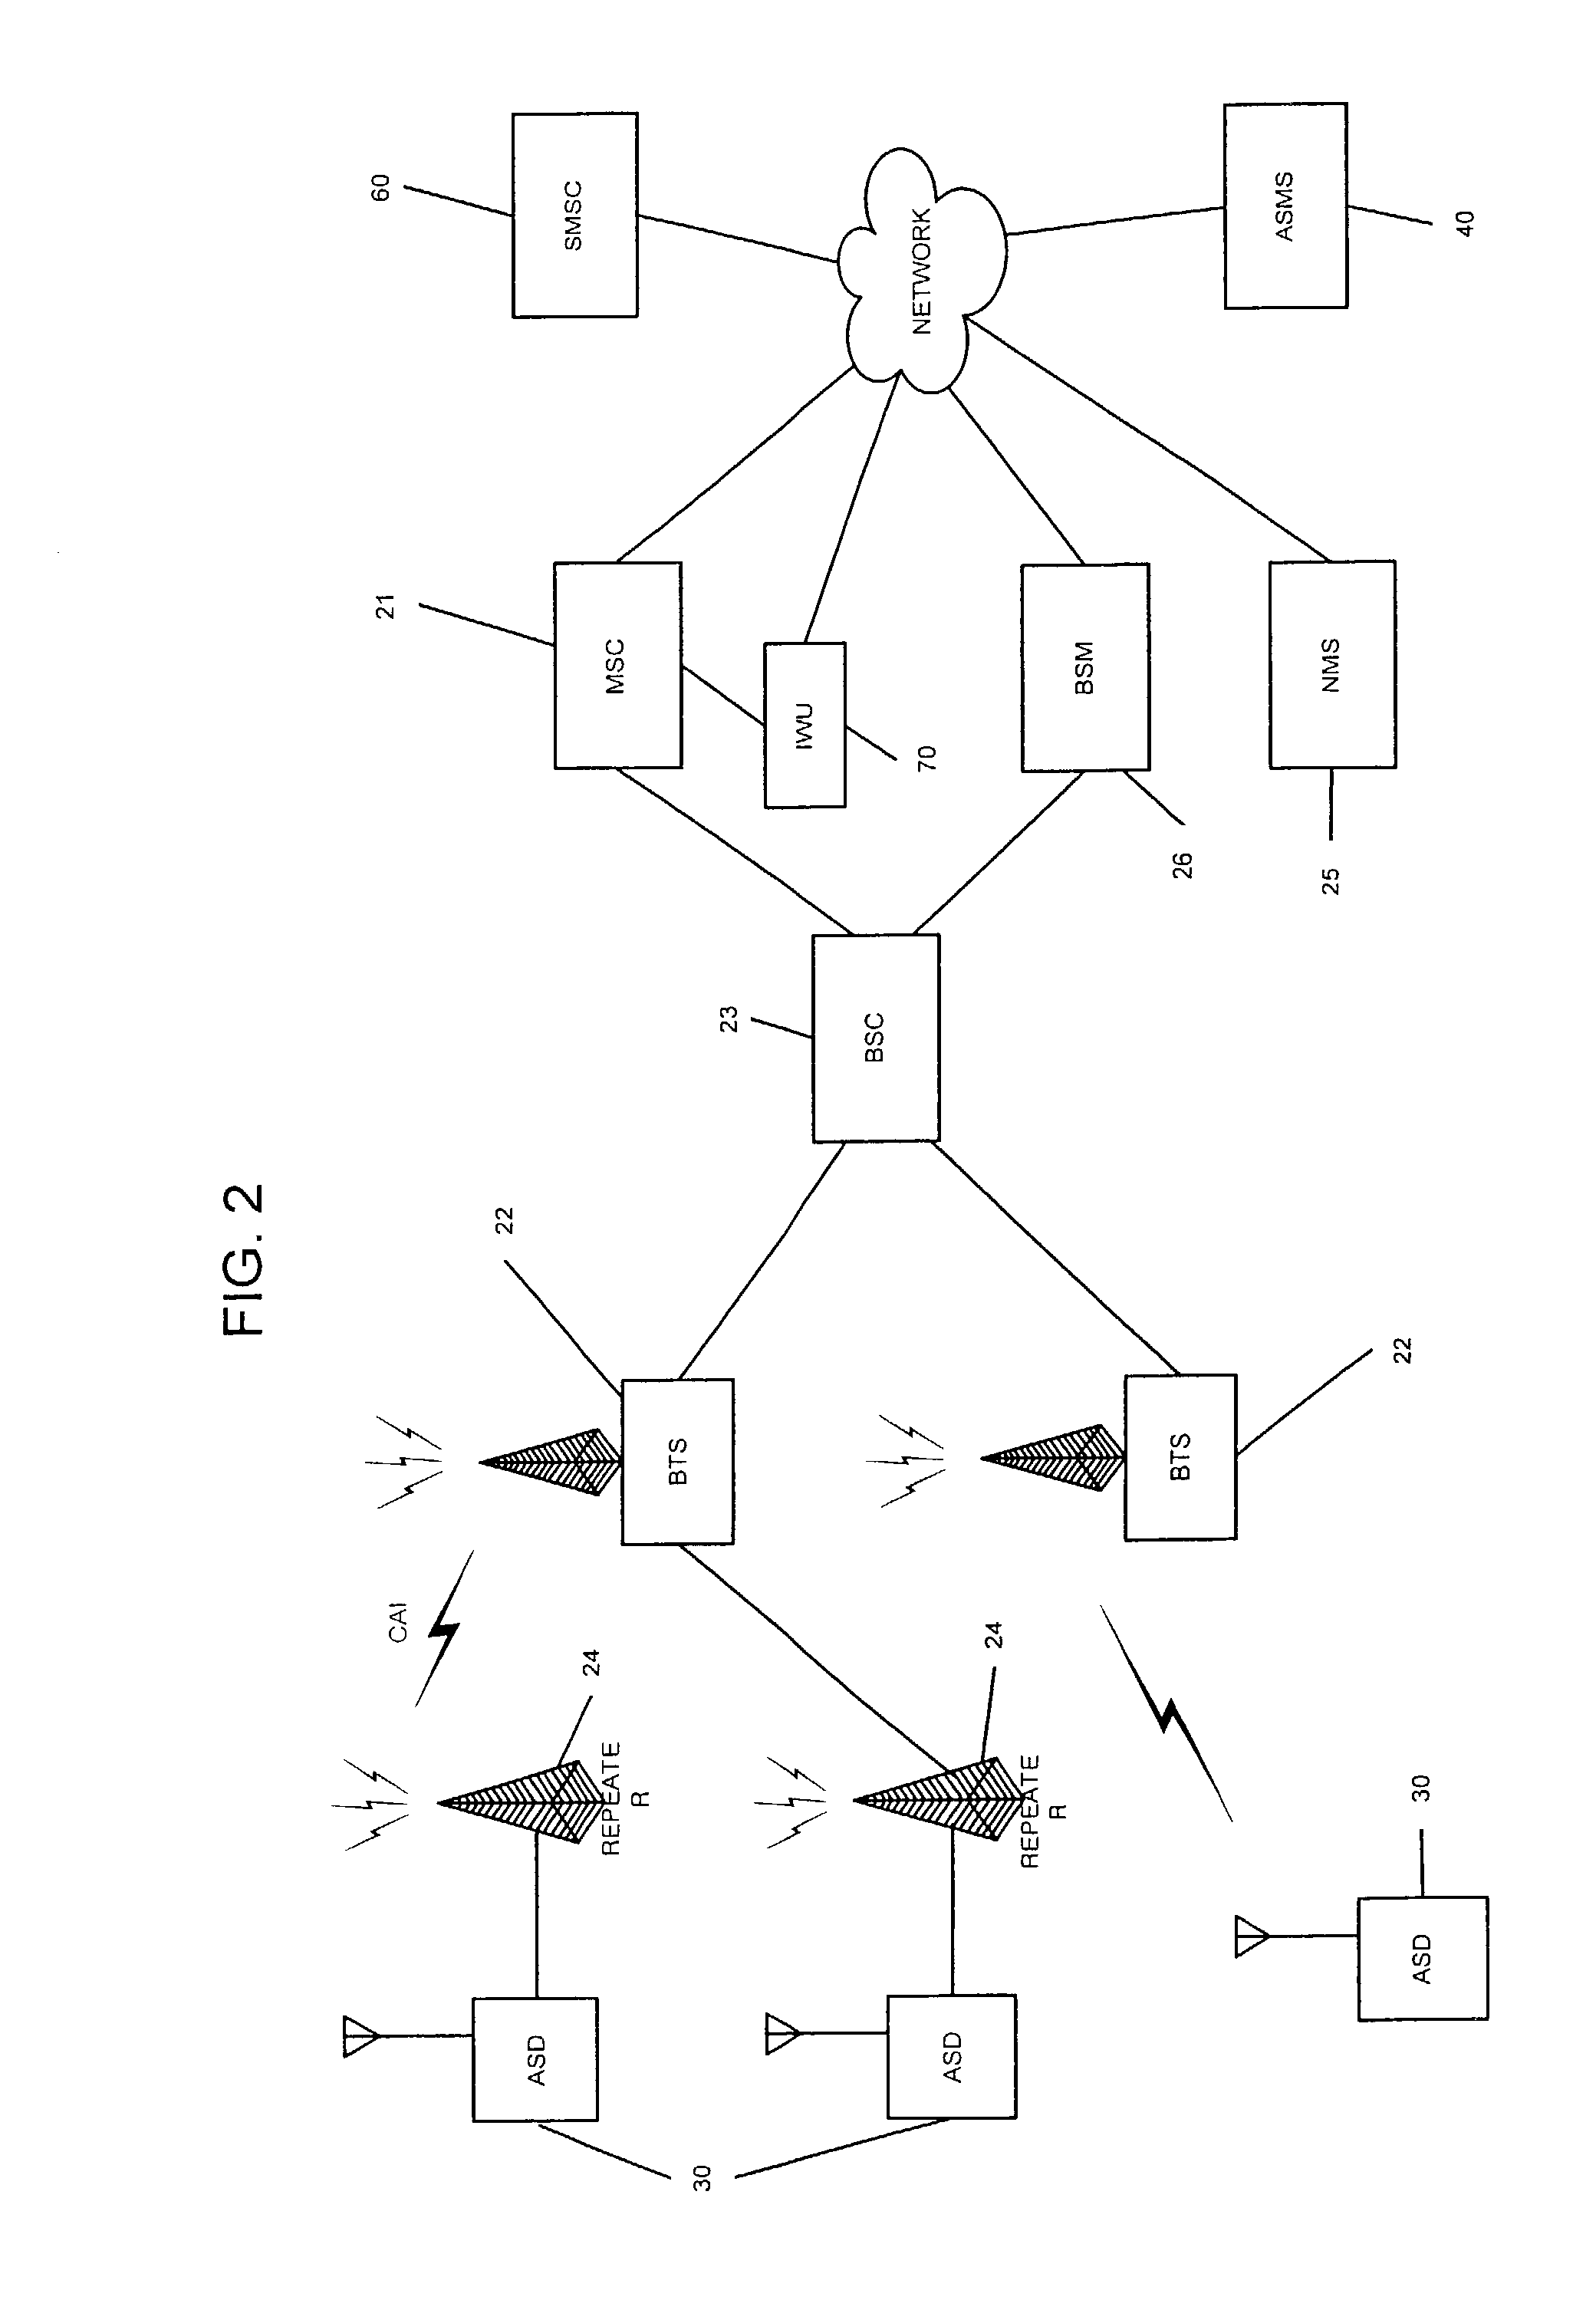 System and method for monitoring and testing network elements